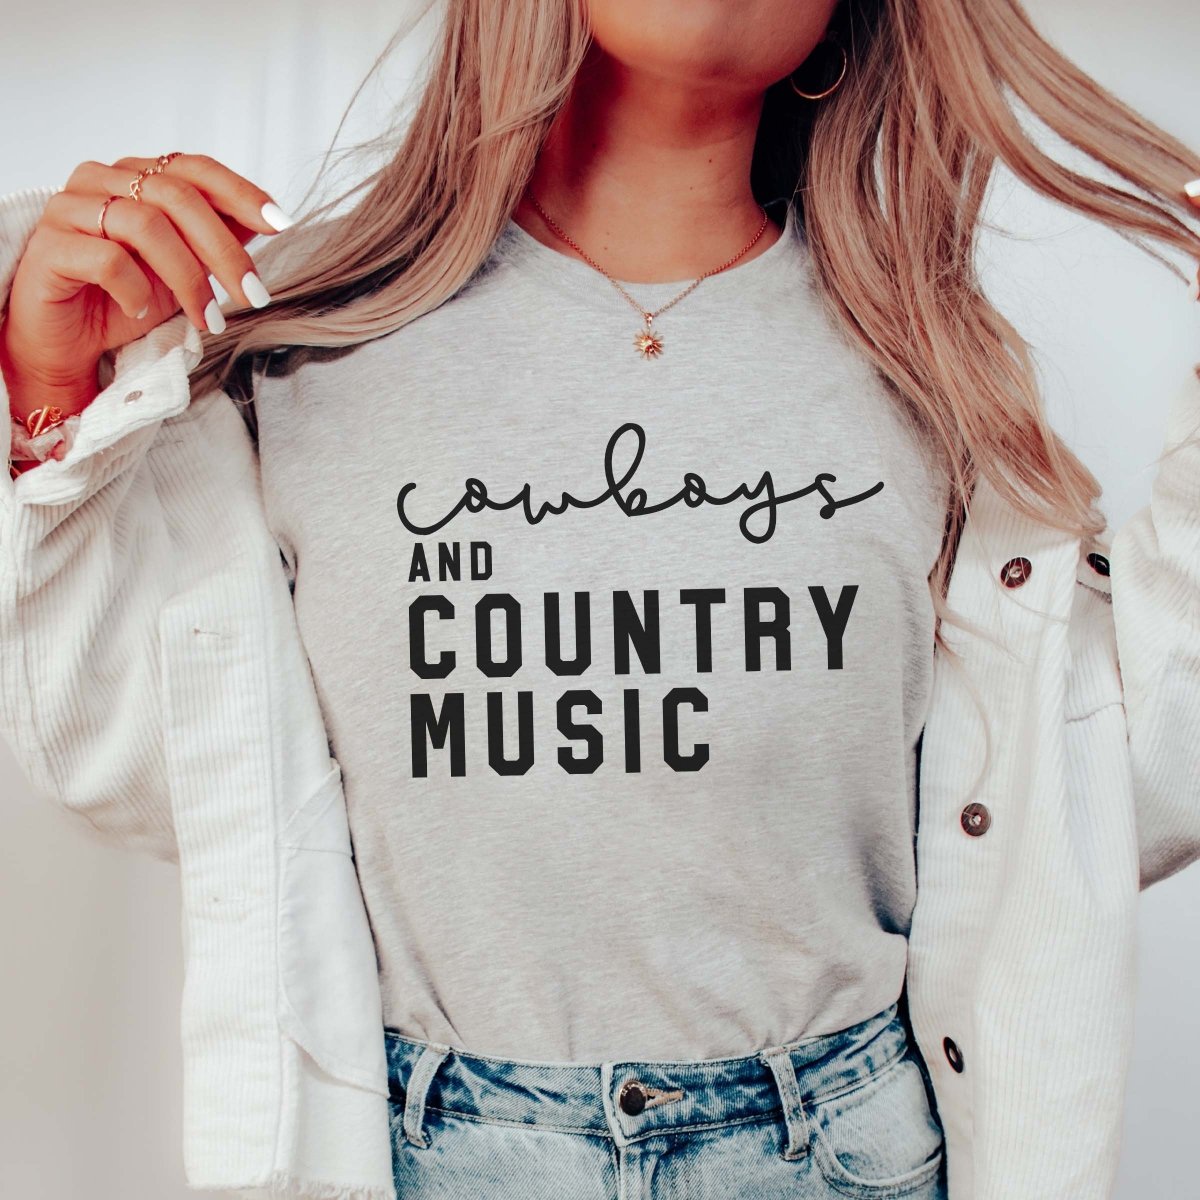 Cowboys and Country Music Tee - Limeberry Designs